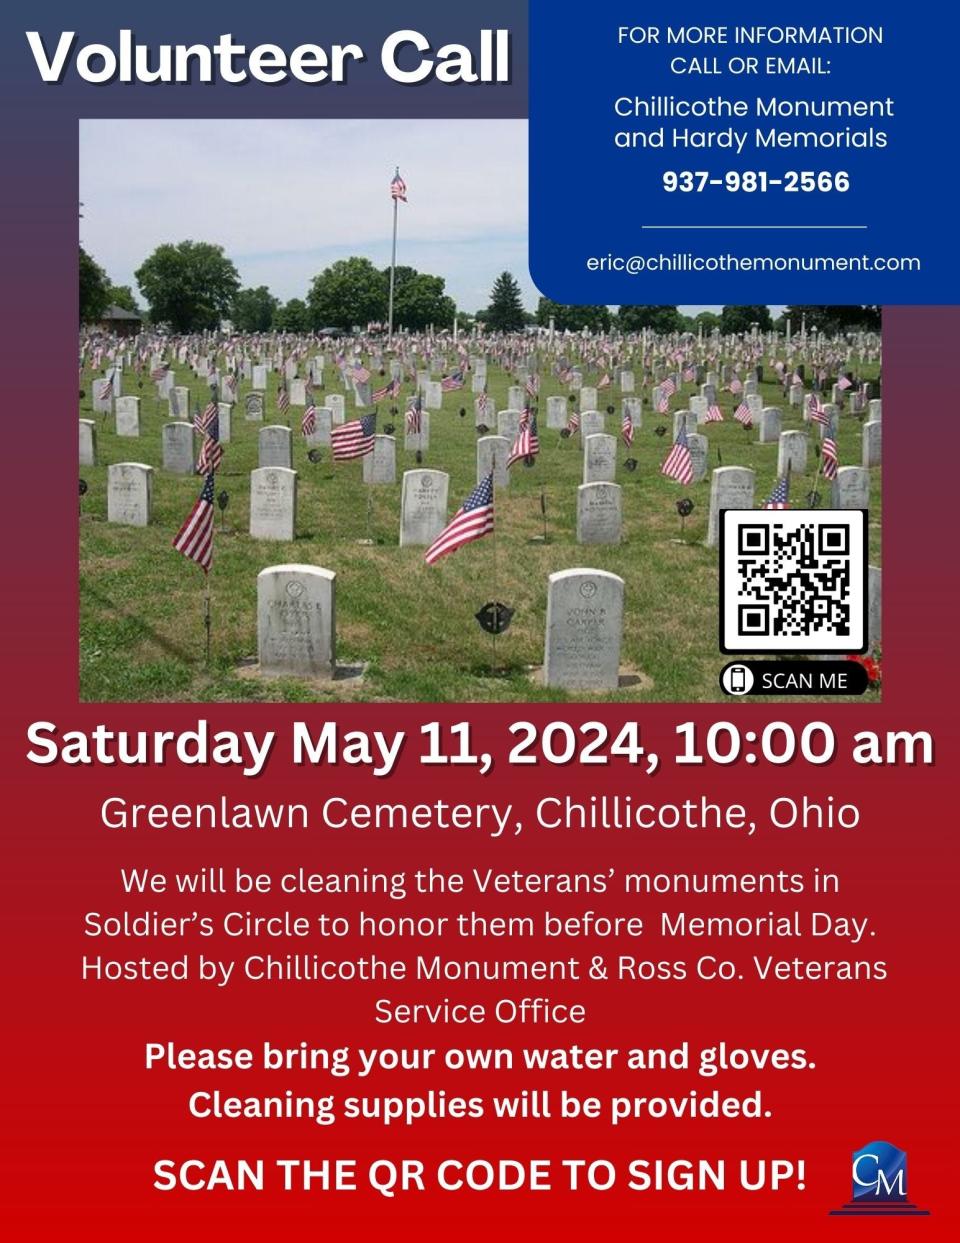 Chillicothe Monument and Hardy Memorials are doing a massive cleaning at Soldier's Circle prior to Memorial Day at Greenlawn Cemetery.